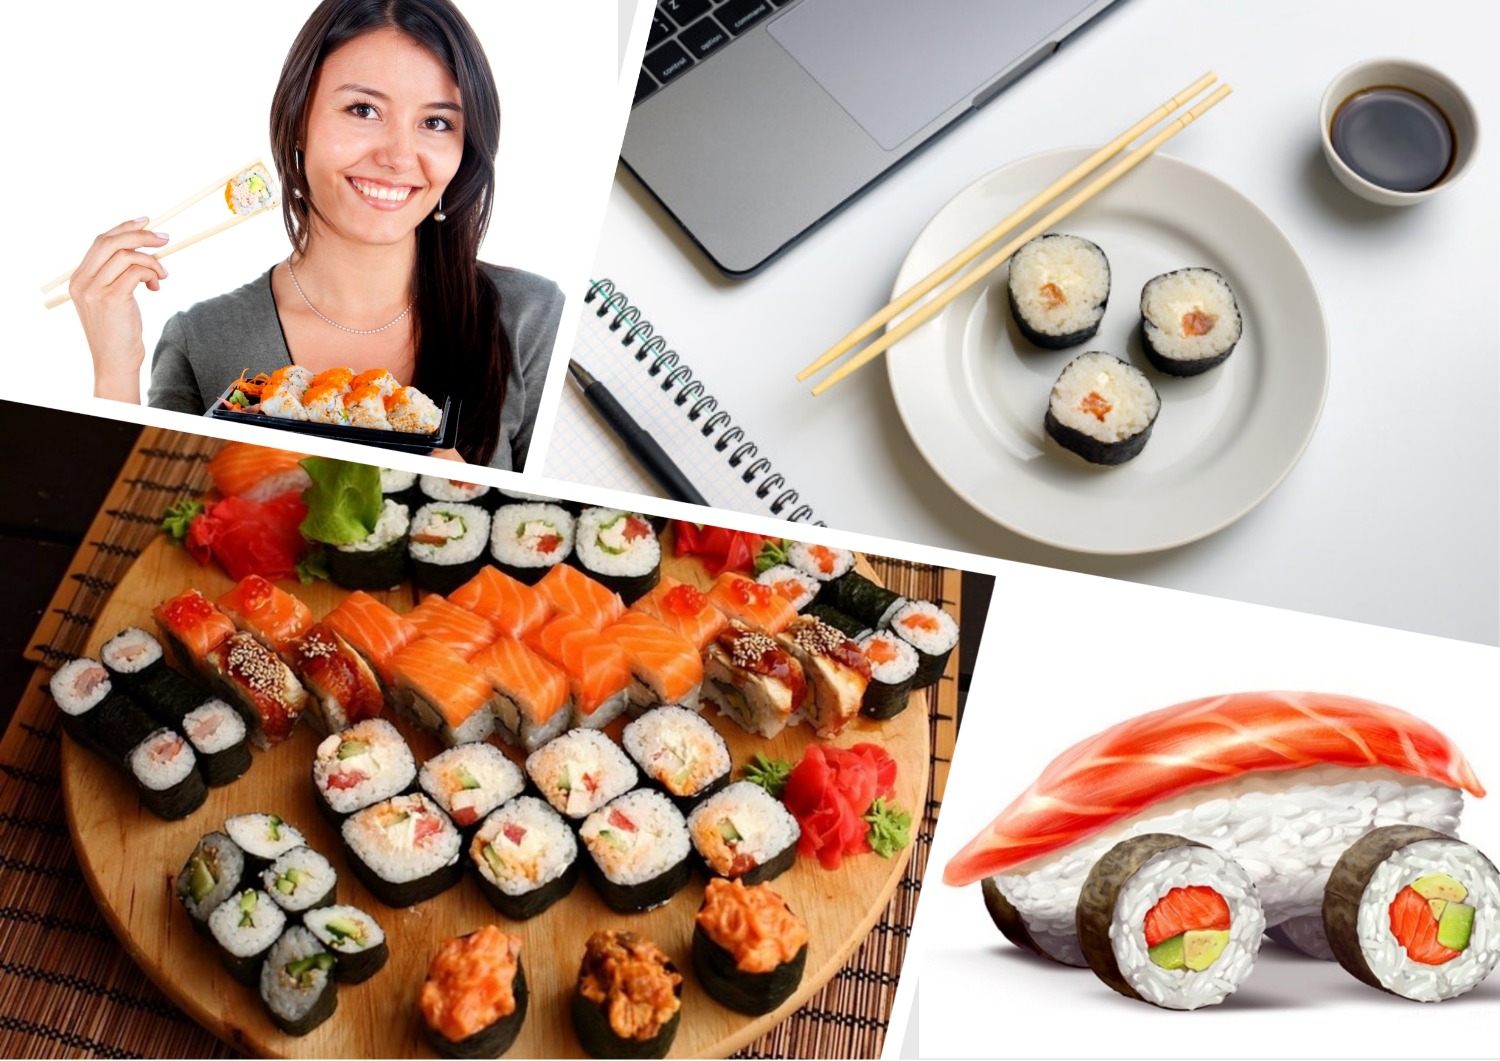 The best delivery services for sushi and rolls in St. Petersburg in 2020